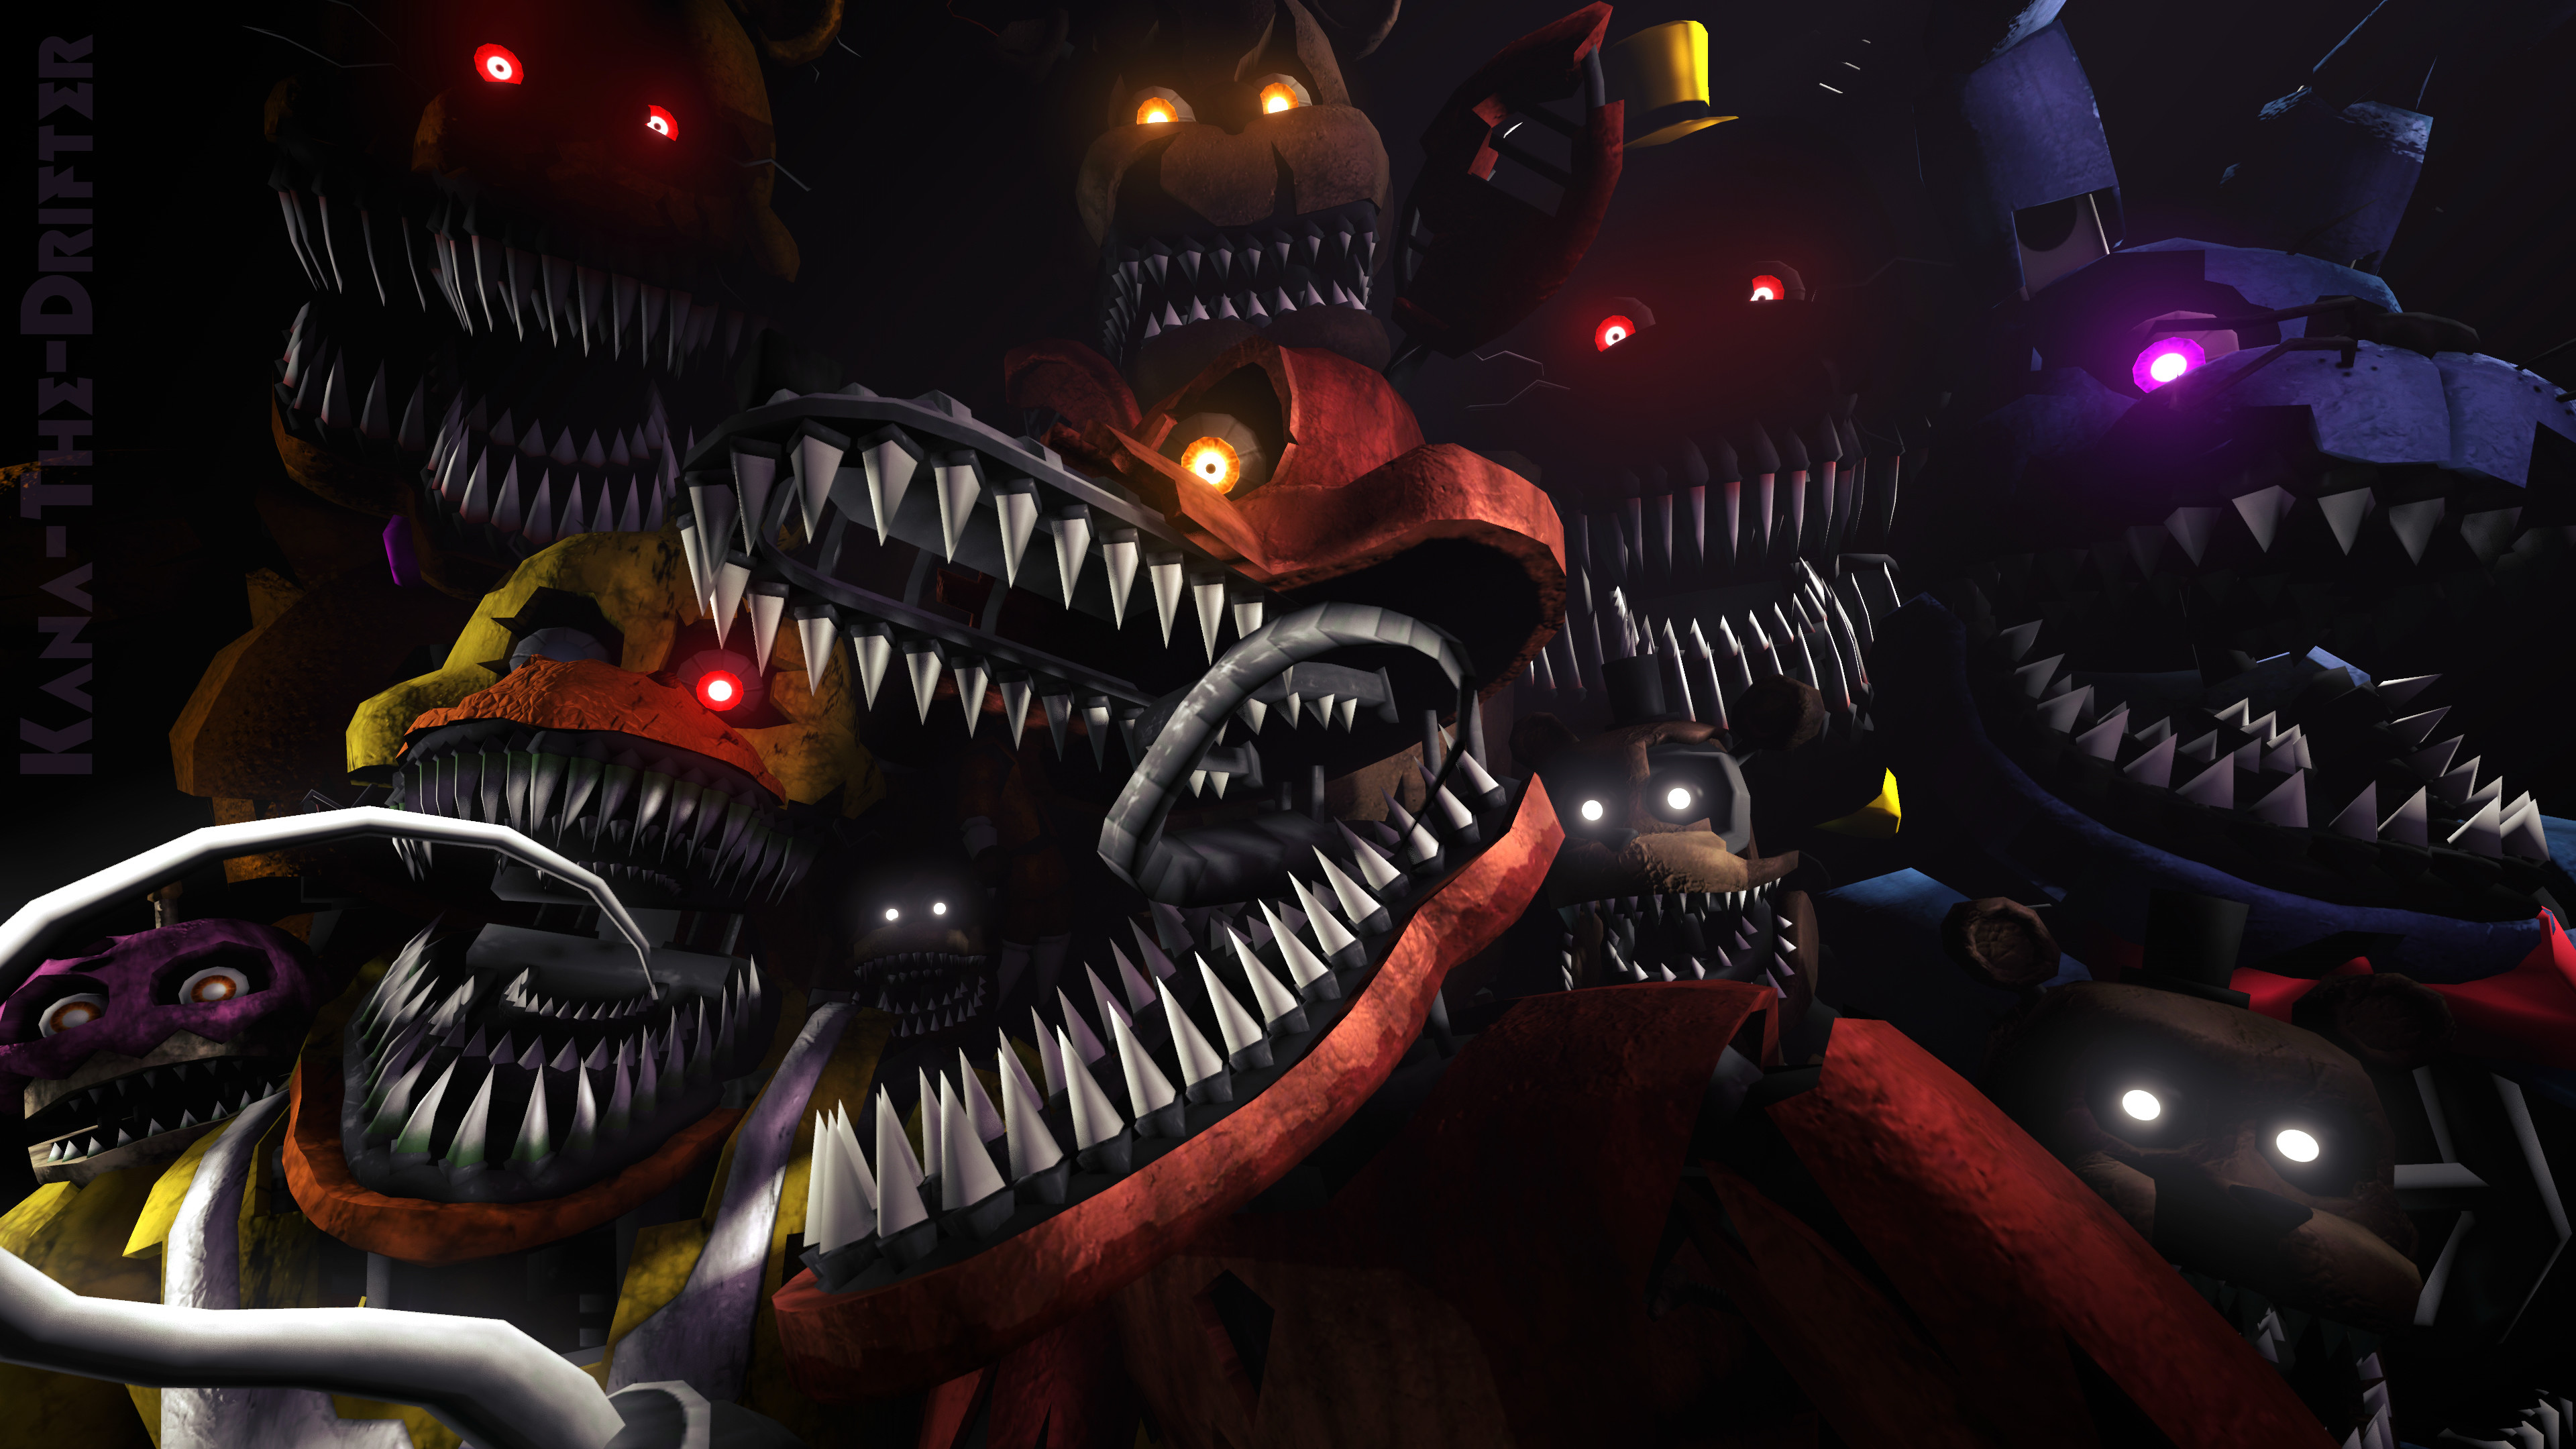 3840x2160 We'll Stay Here Forever (FNAF SFM Wallpaper) by Kana-The-